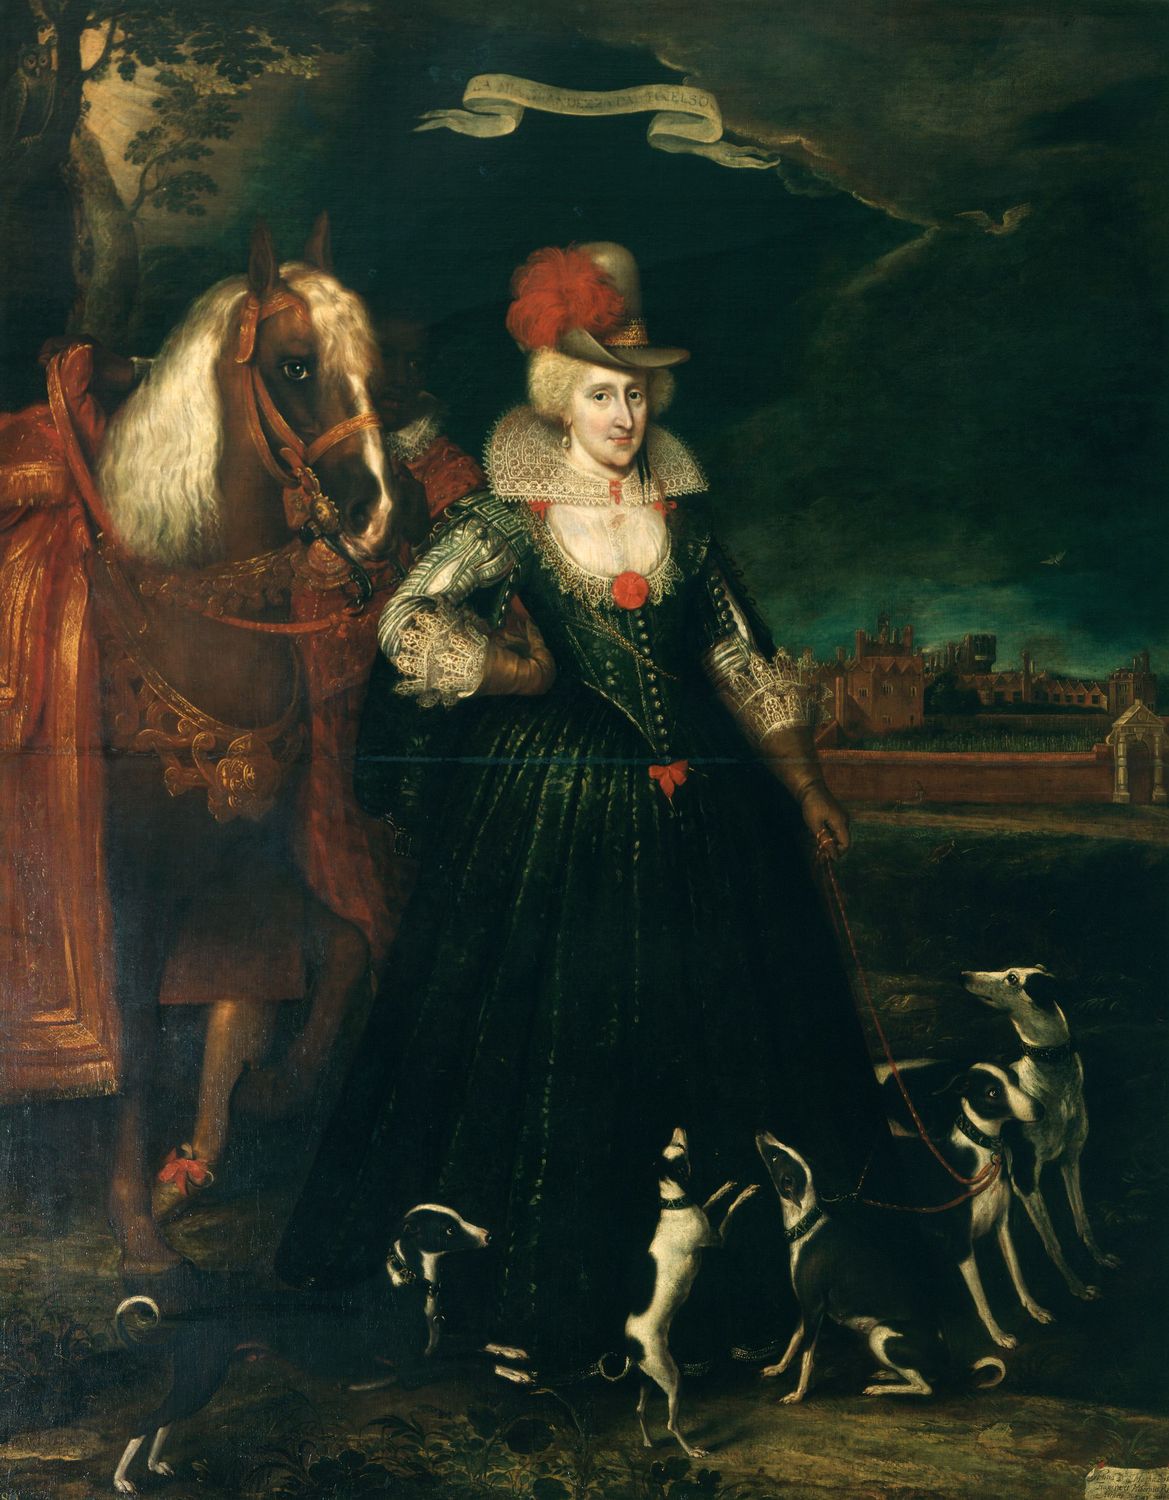 Portrait of Anne of Denmark by Paul van Somer. Image courtesy of the Royal Collection (UK).